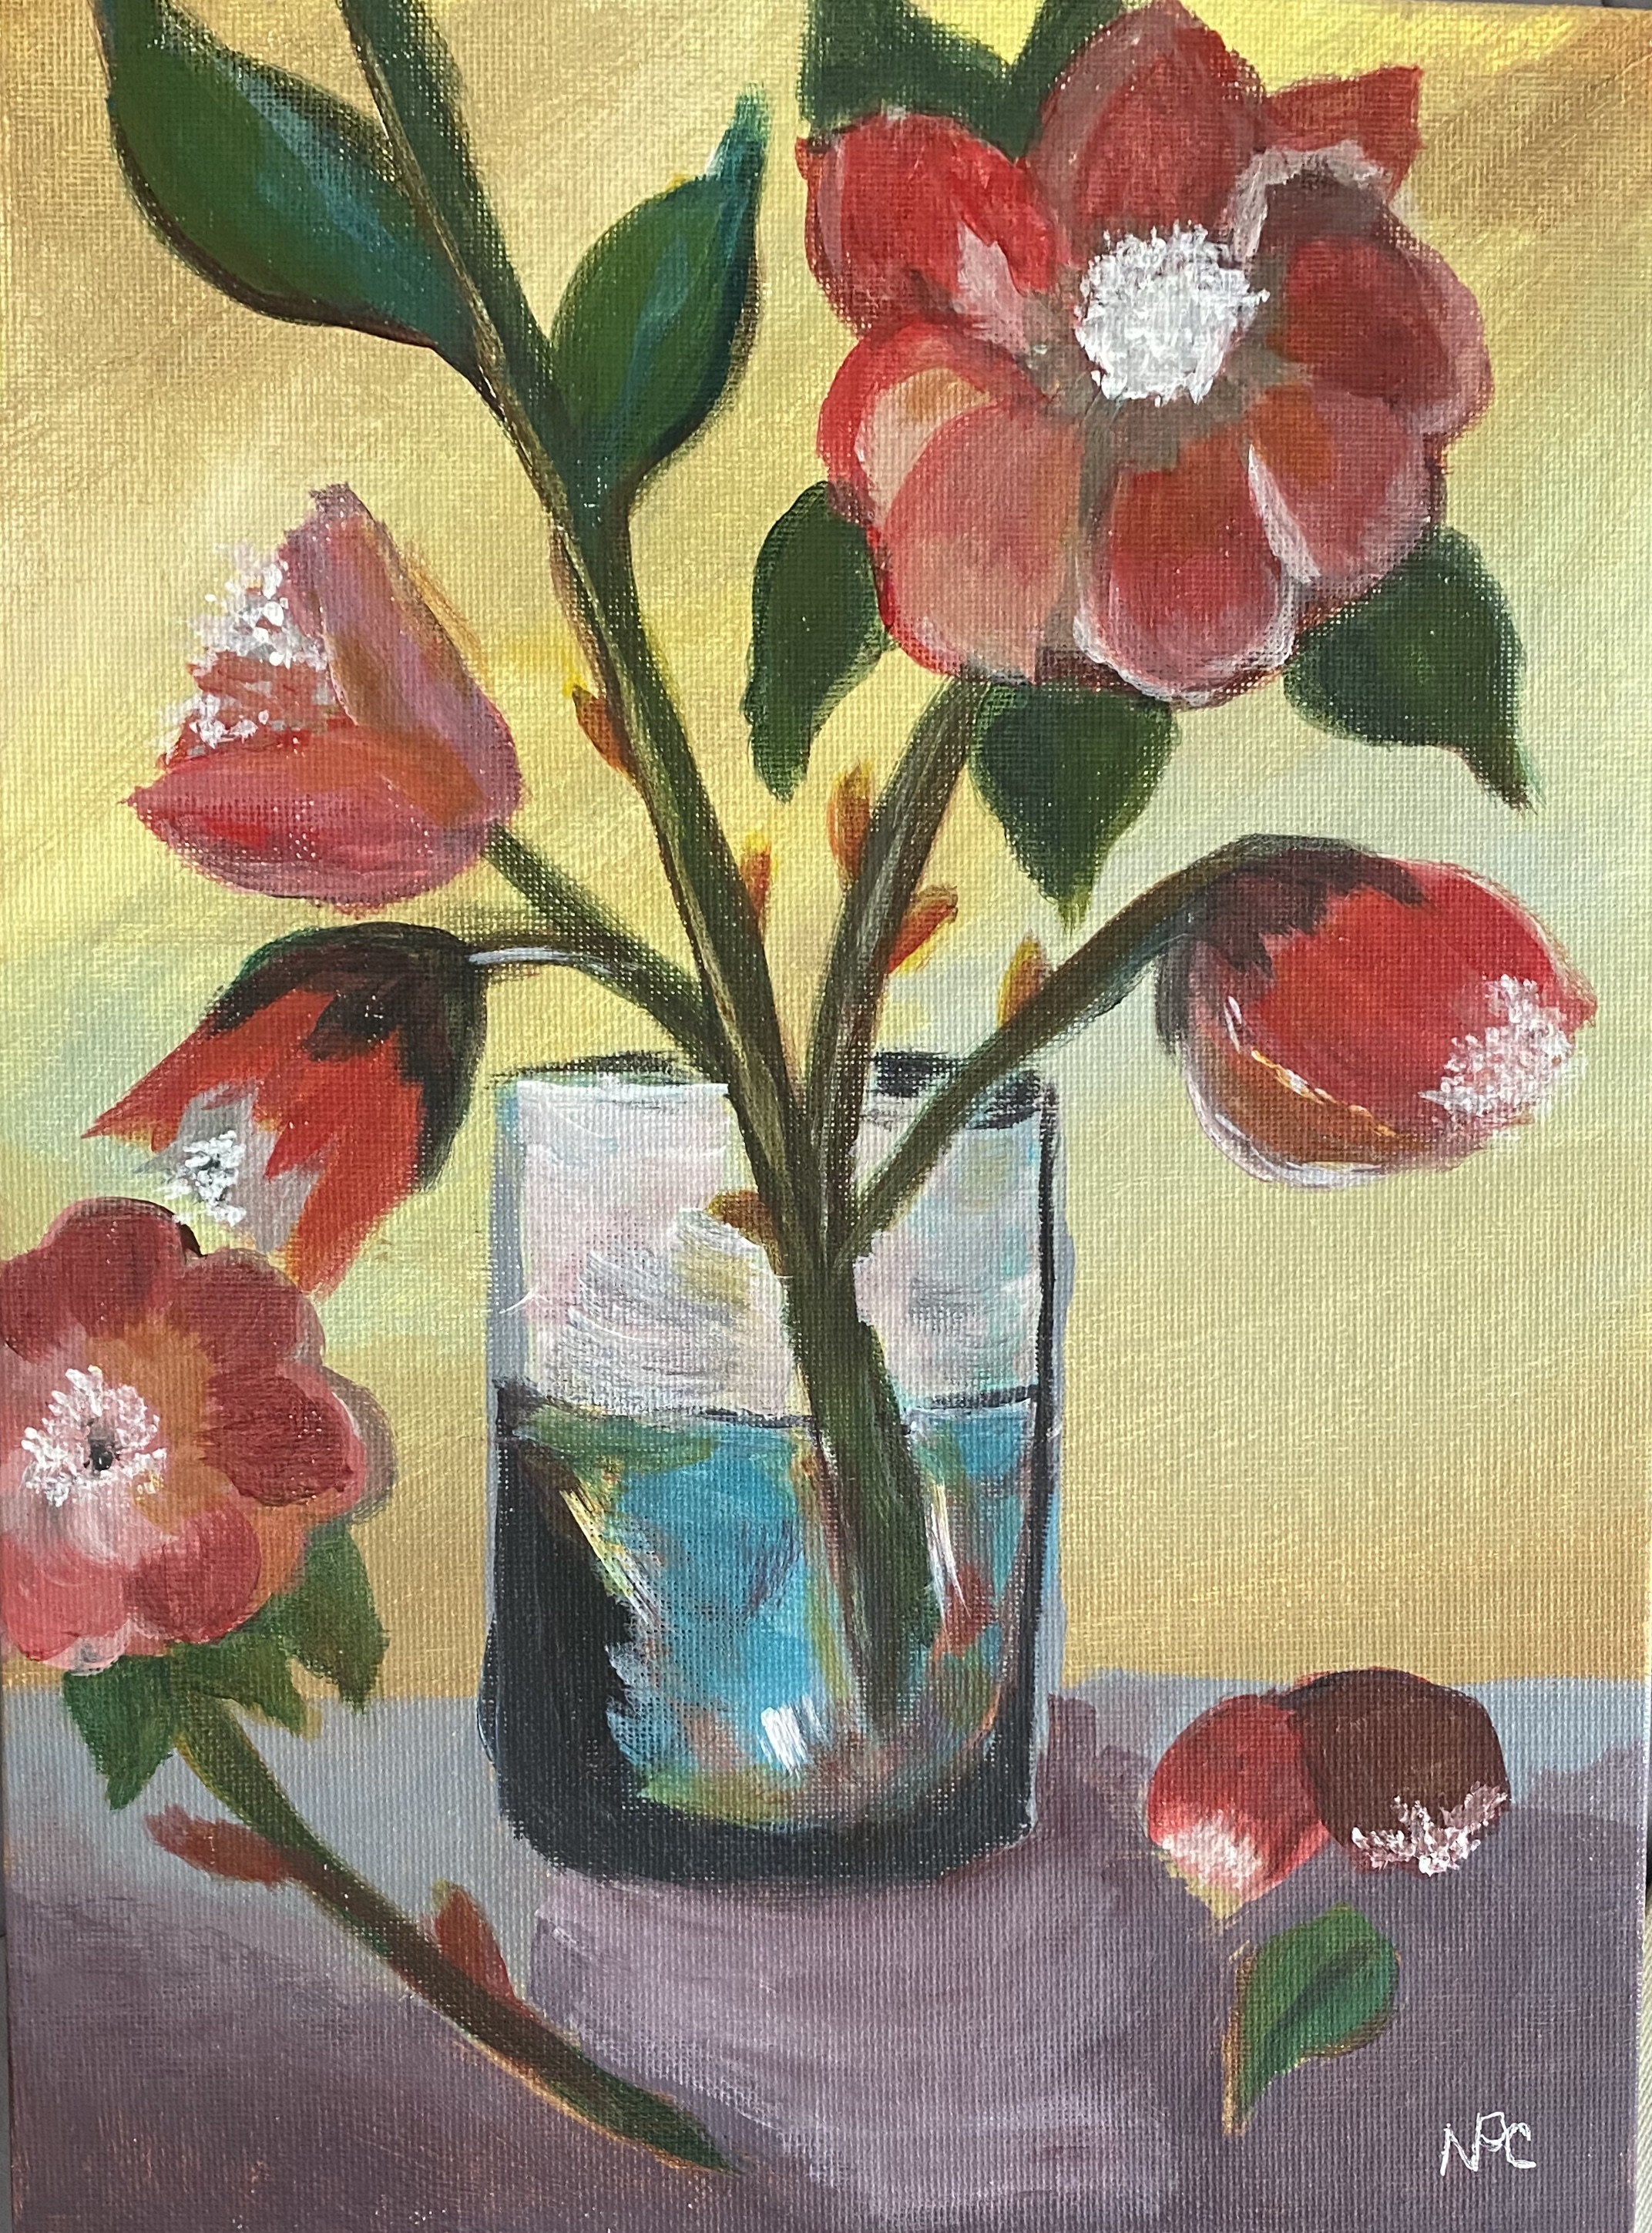 Red flowers in a glass